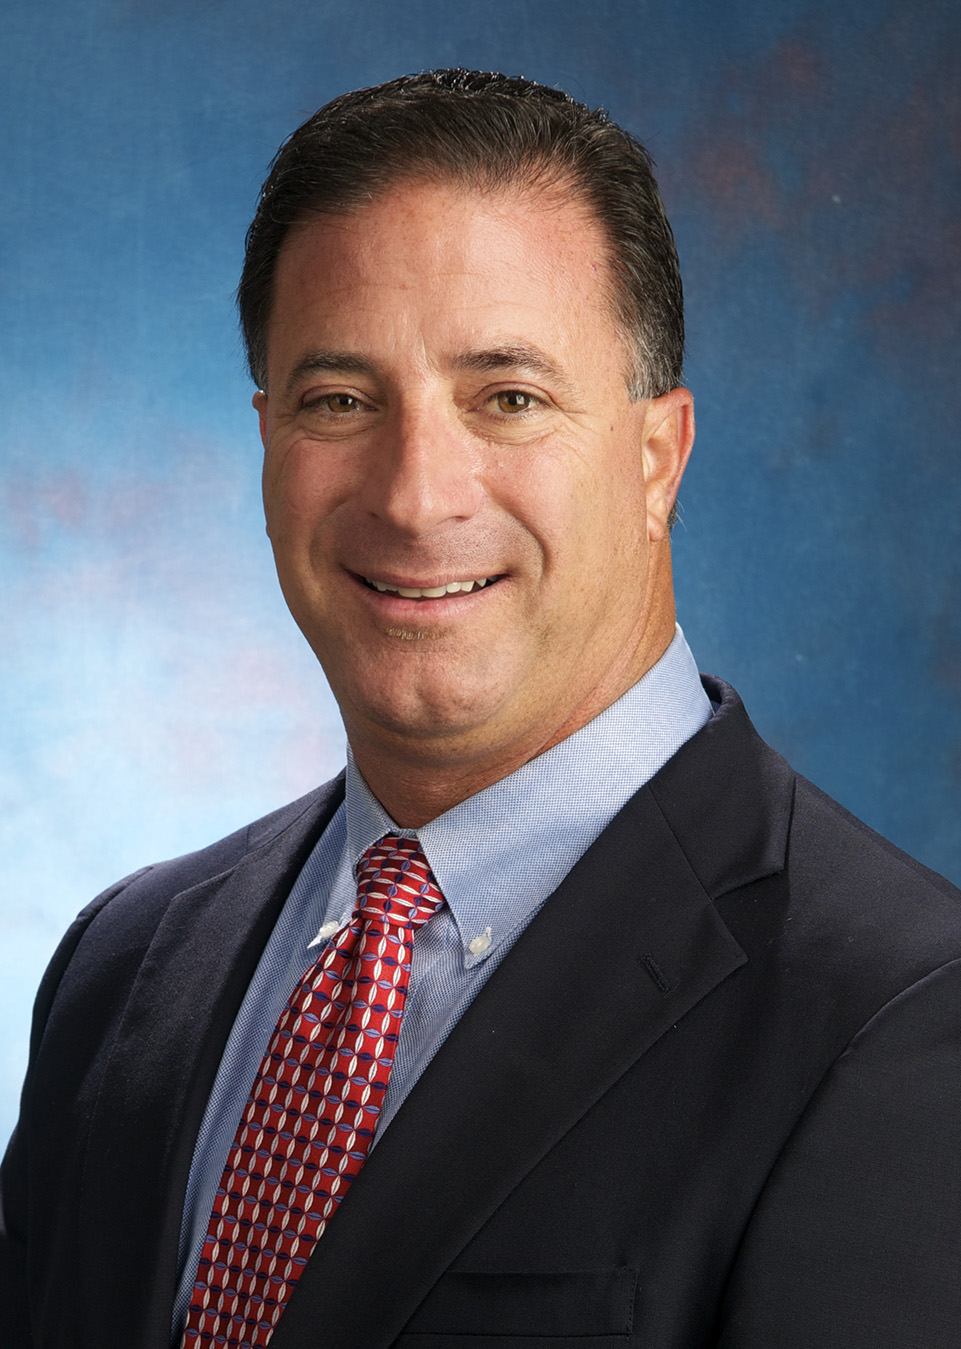 Vince Provenzano, President of Brokerage at Pacific Coast Commercial/TCN Worldwide